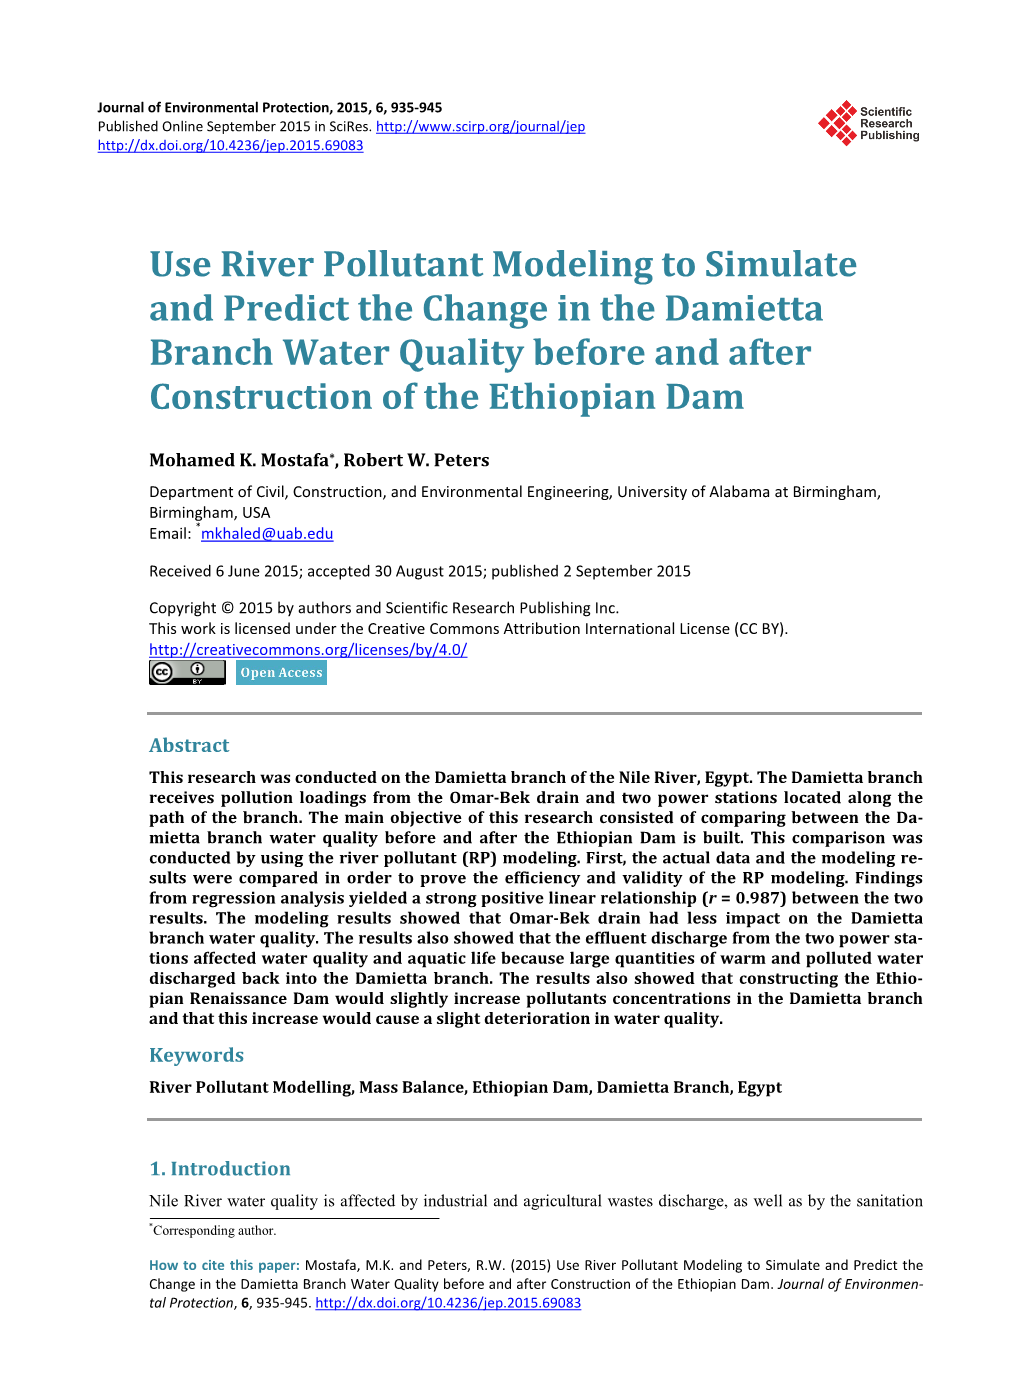 Use River Pollutant Modeling to Simulate and Predict the Change in the Damietta Branch Water Quality Before and After Construction of the Ethiopian Dam